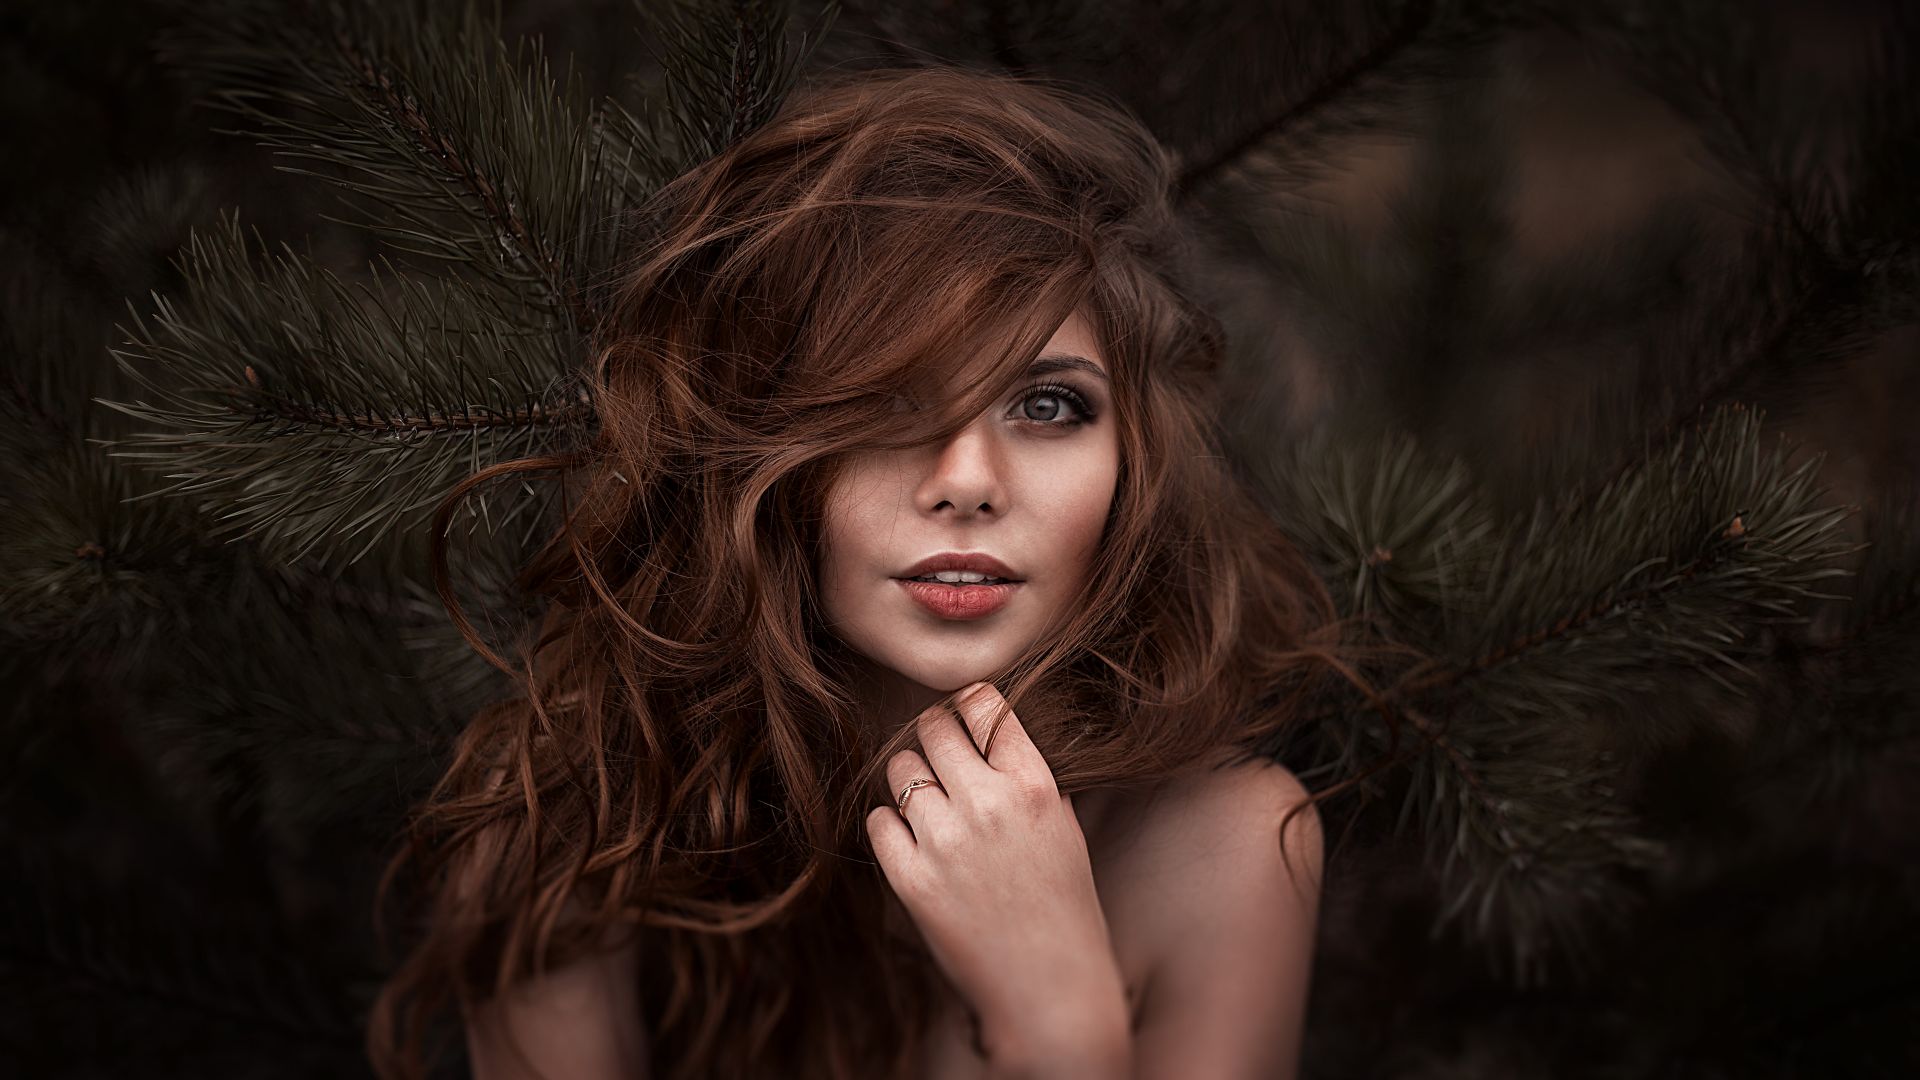 Wallpaper Red head, girl, tree branches, face